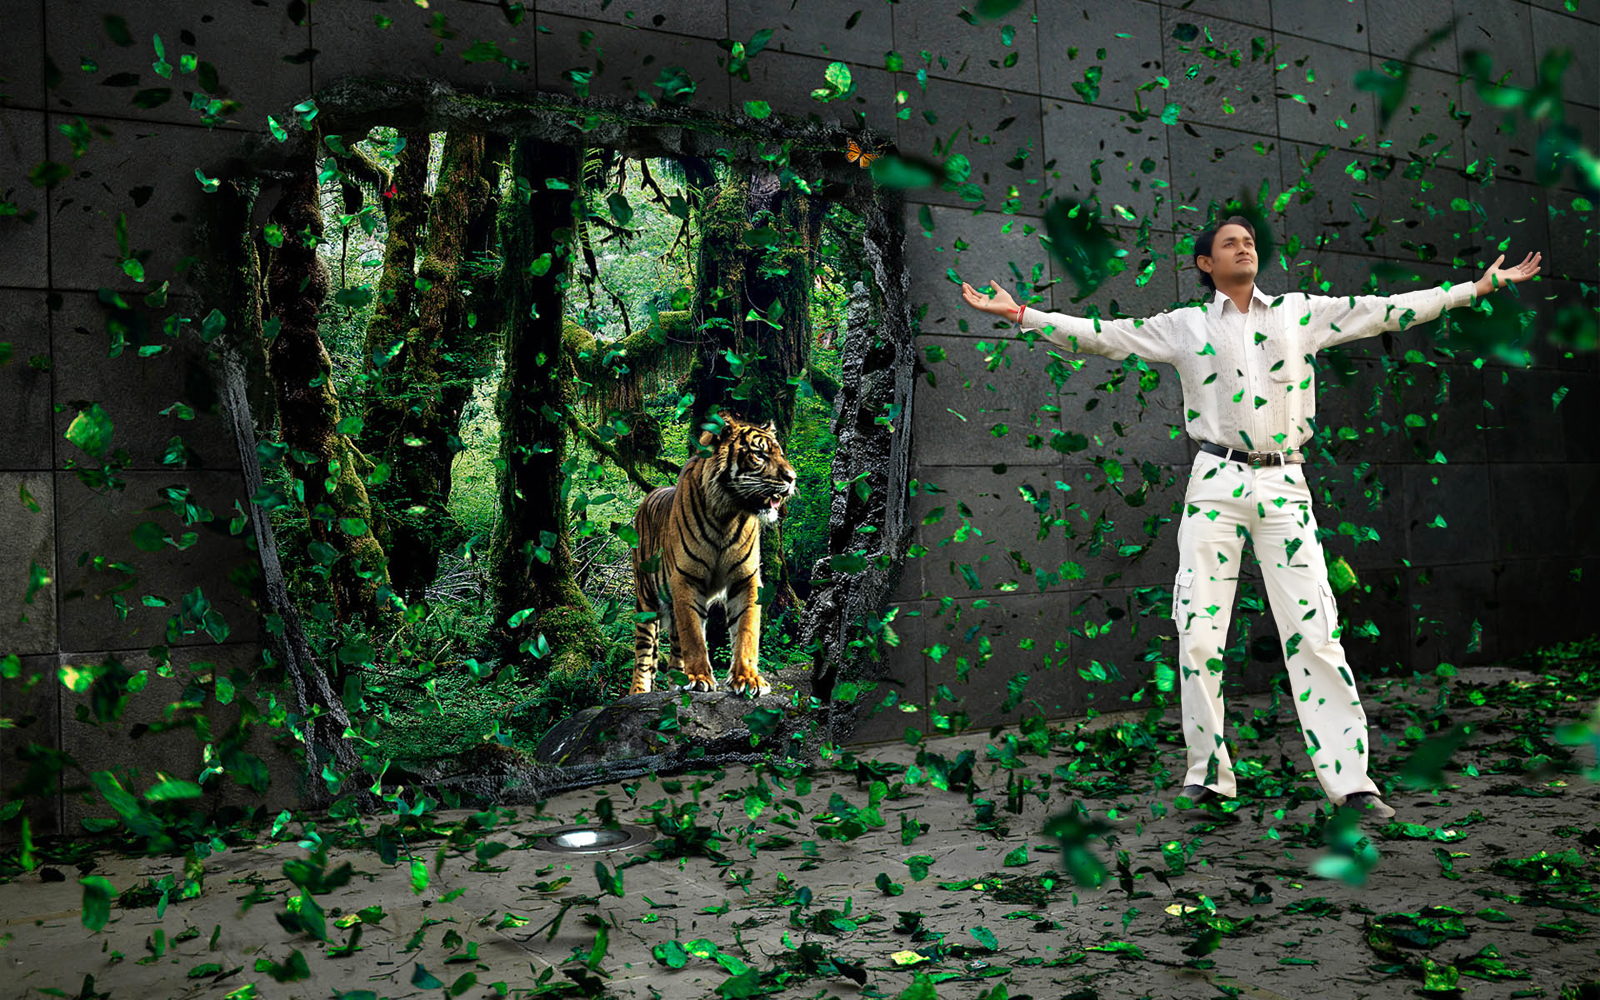 Photo Manipulation Smart Boy With Lion In Forest Wallpaper - Matrix Virtual Reality - HD Wallpaper 